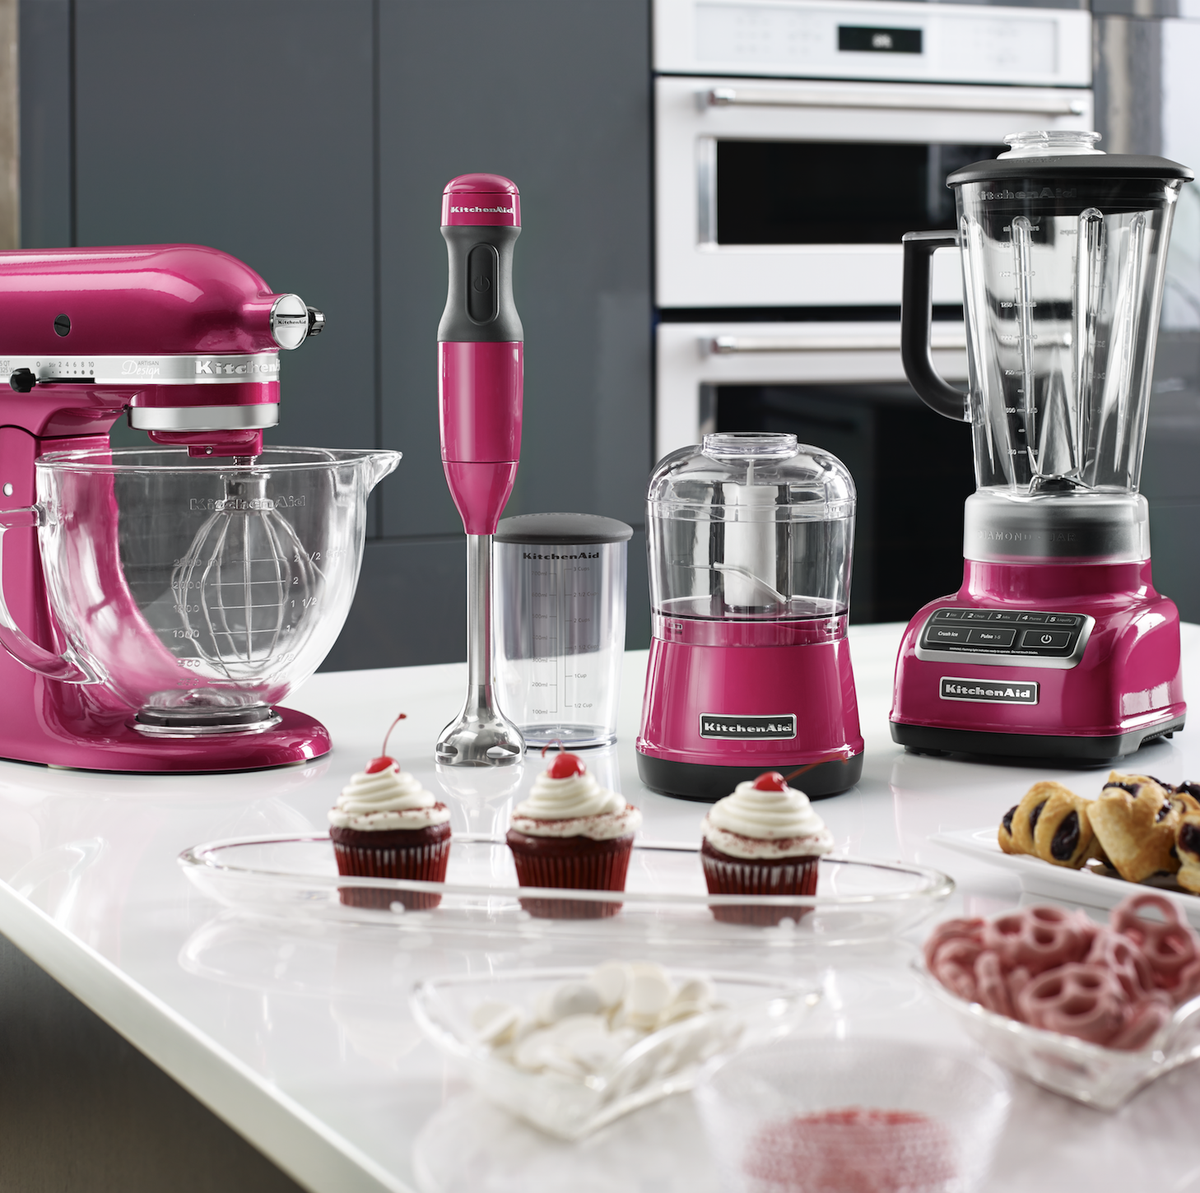 https://hips.hearstapps.com/hmg-prod/images/kitchenaid-pink-collection-1536773054.png?crop=0.808xw:1.00xh;0.0737xw,0&resize=1200:*